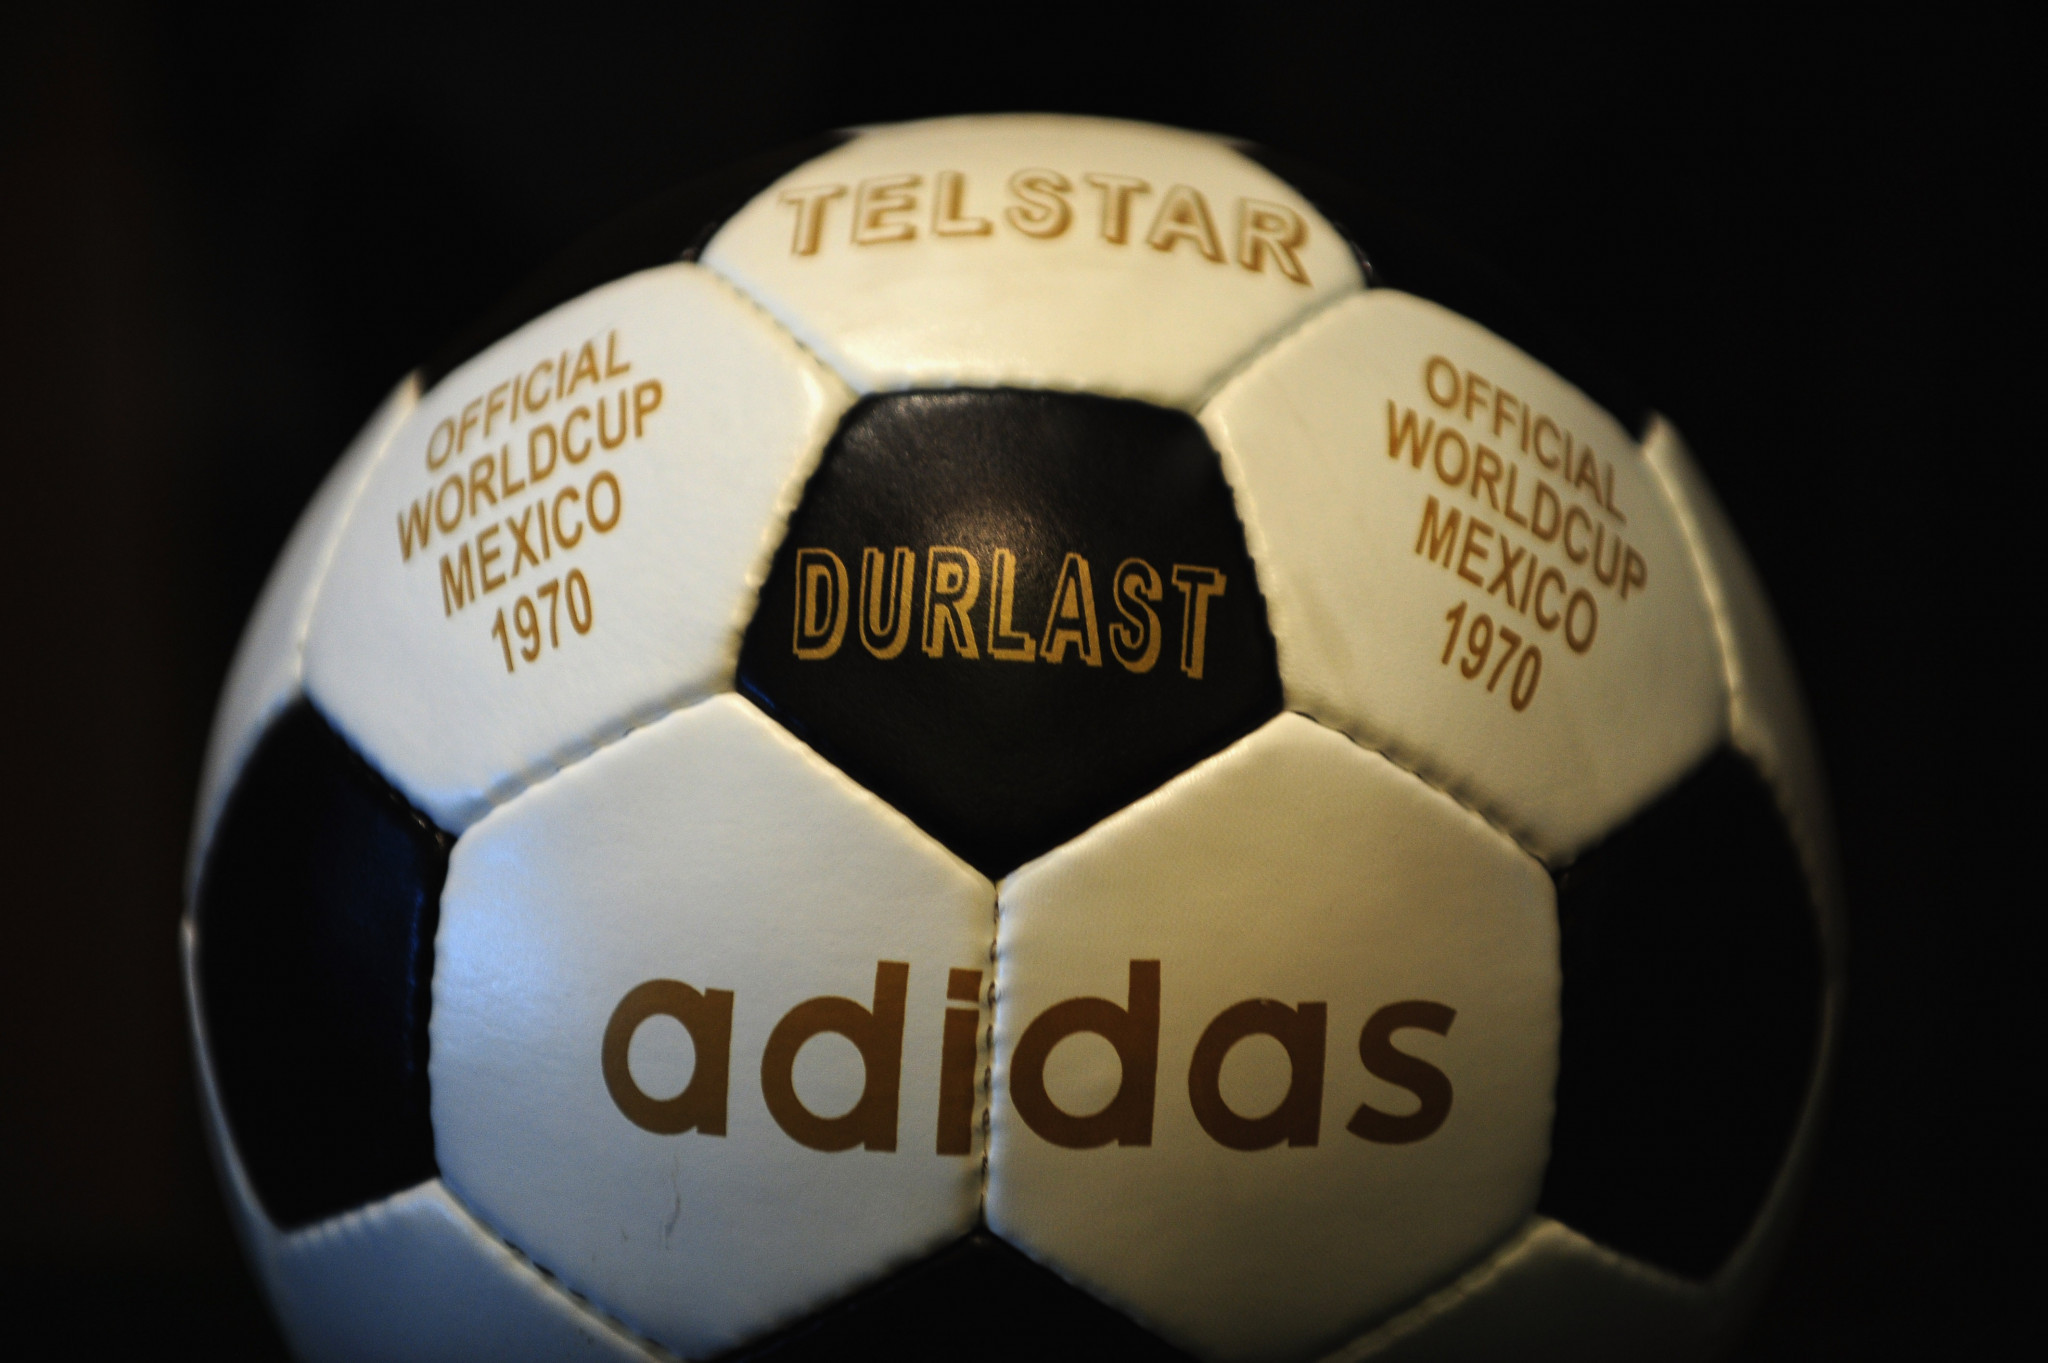 Adidas first manufactured the World Cup ball for Mexico 1970 ©Getty Images